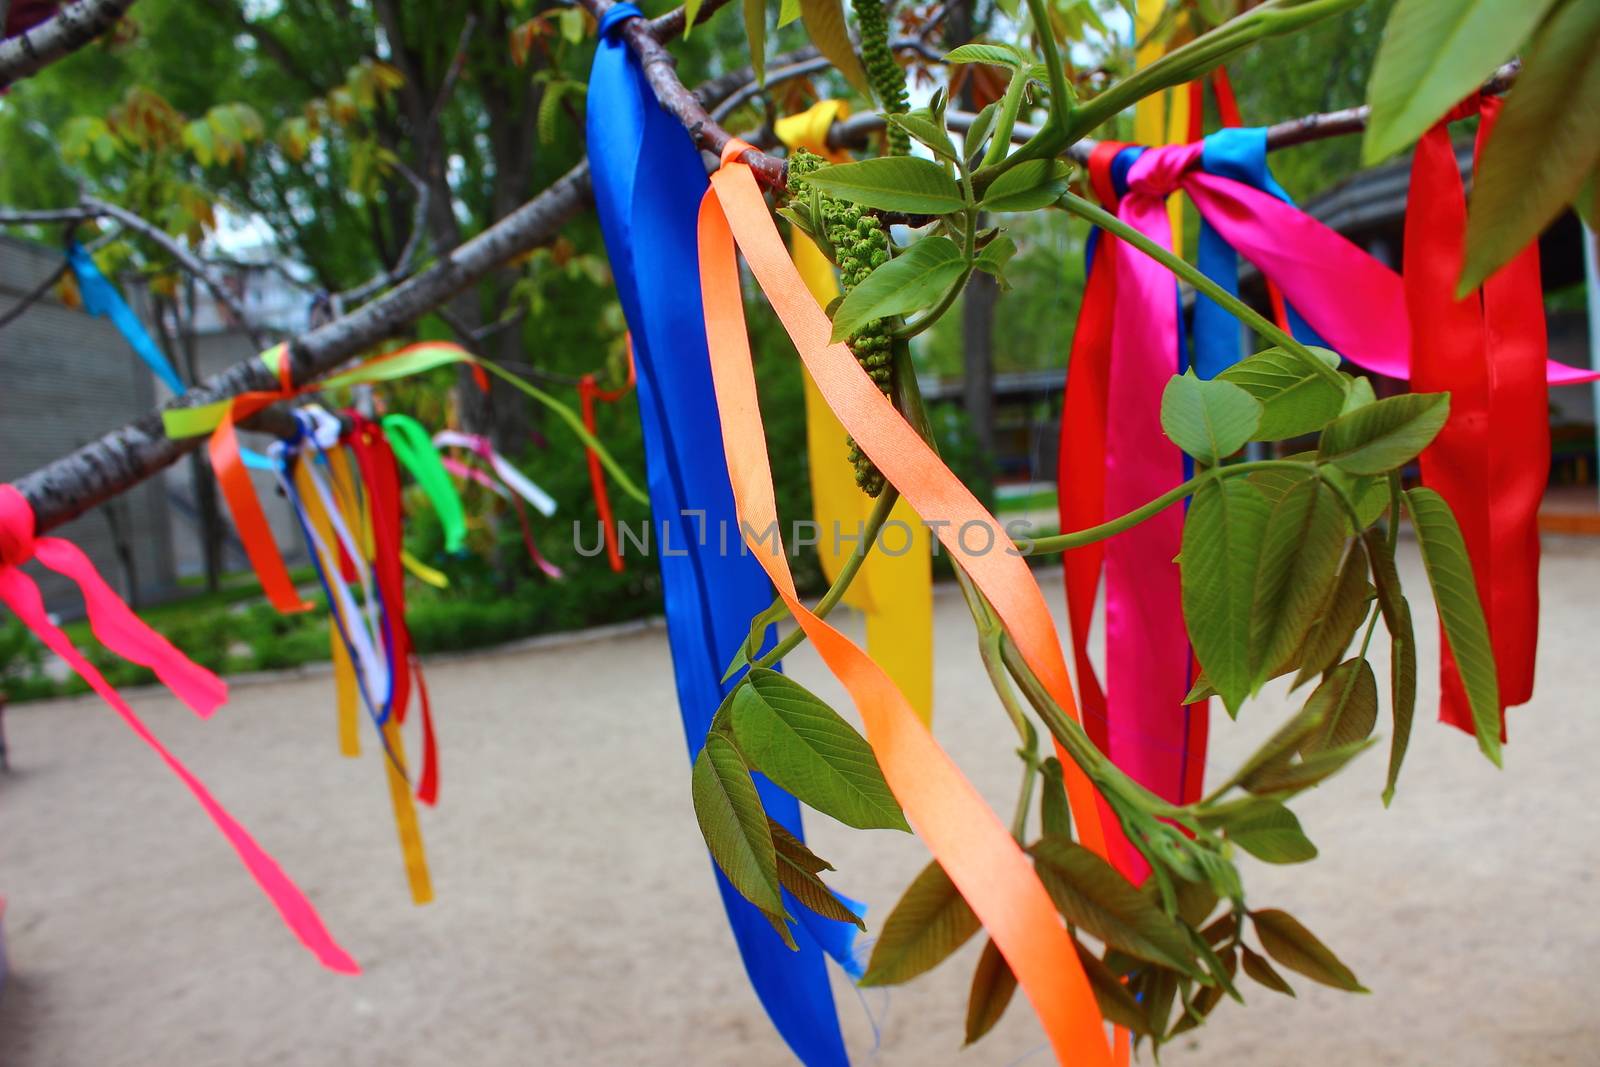 By branches of a tree tied silk ribbons of different colors